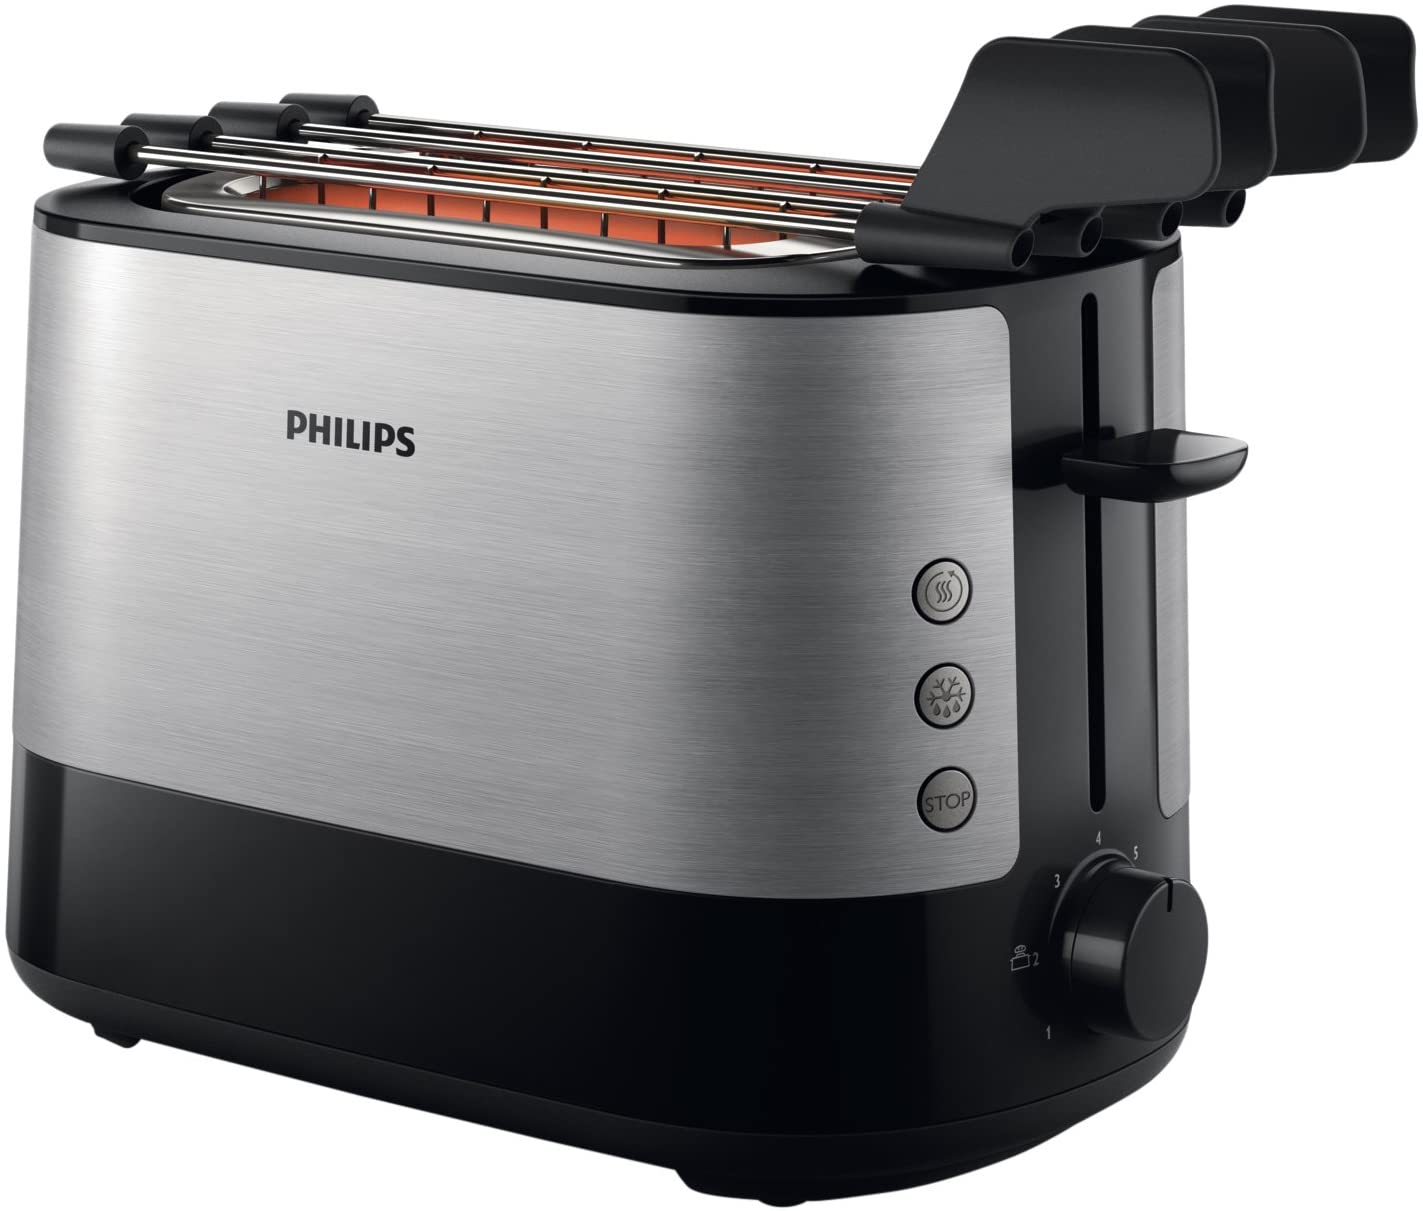 Philips HD2639/90 – Toaster (730 W, Extra Large Slot, Sandwich Accessories), Black and Silver